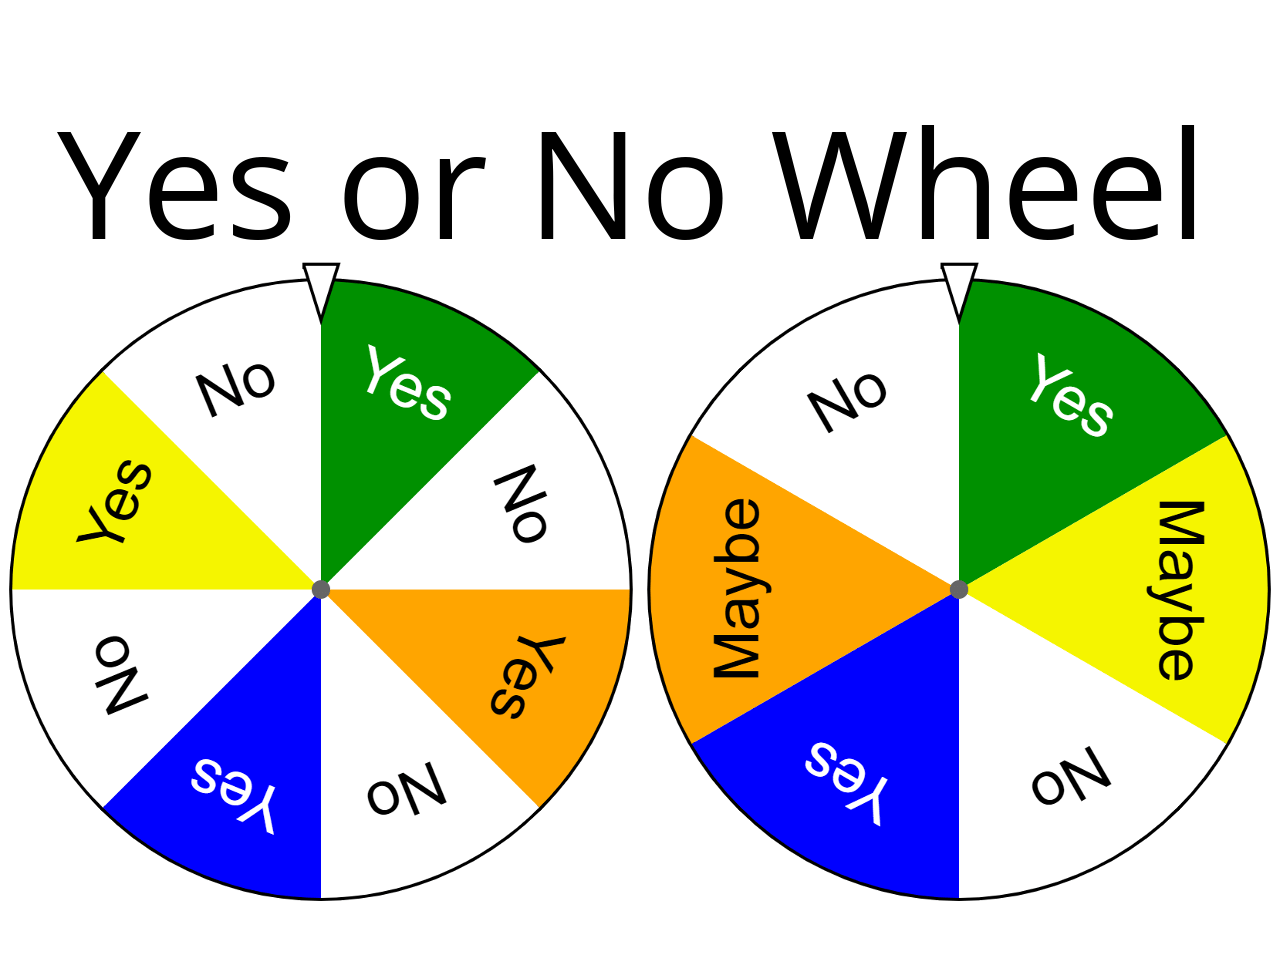 YES NO Wheel - Spin the wheel to and get Yes or No answer